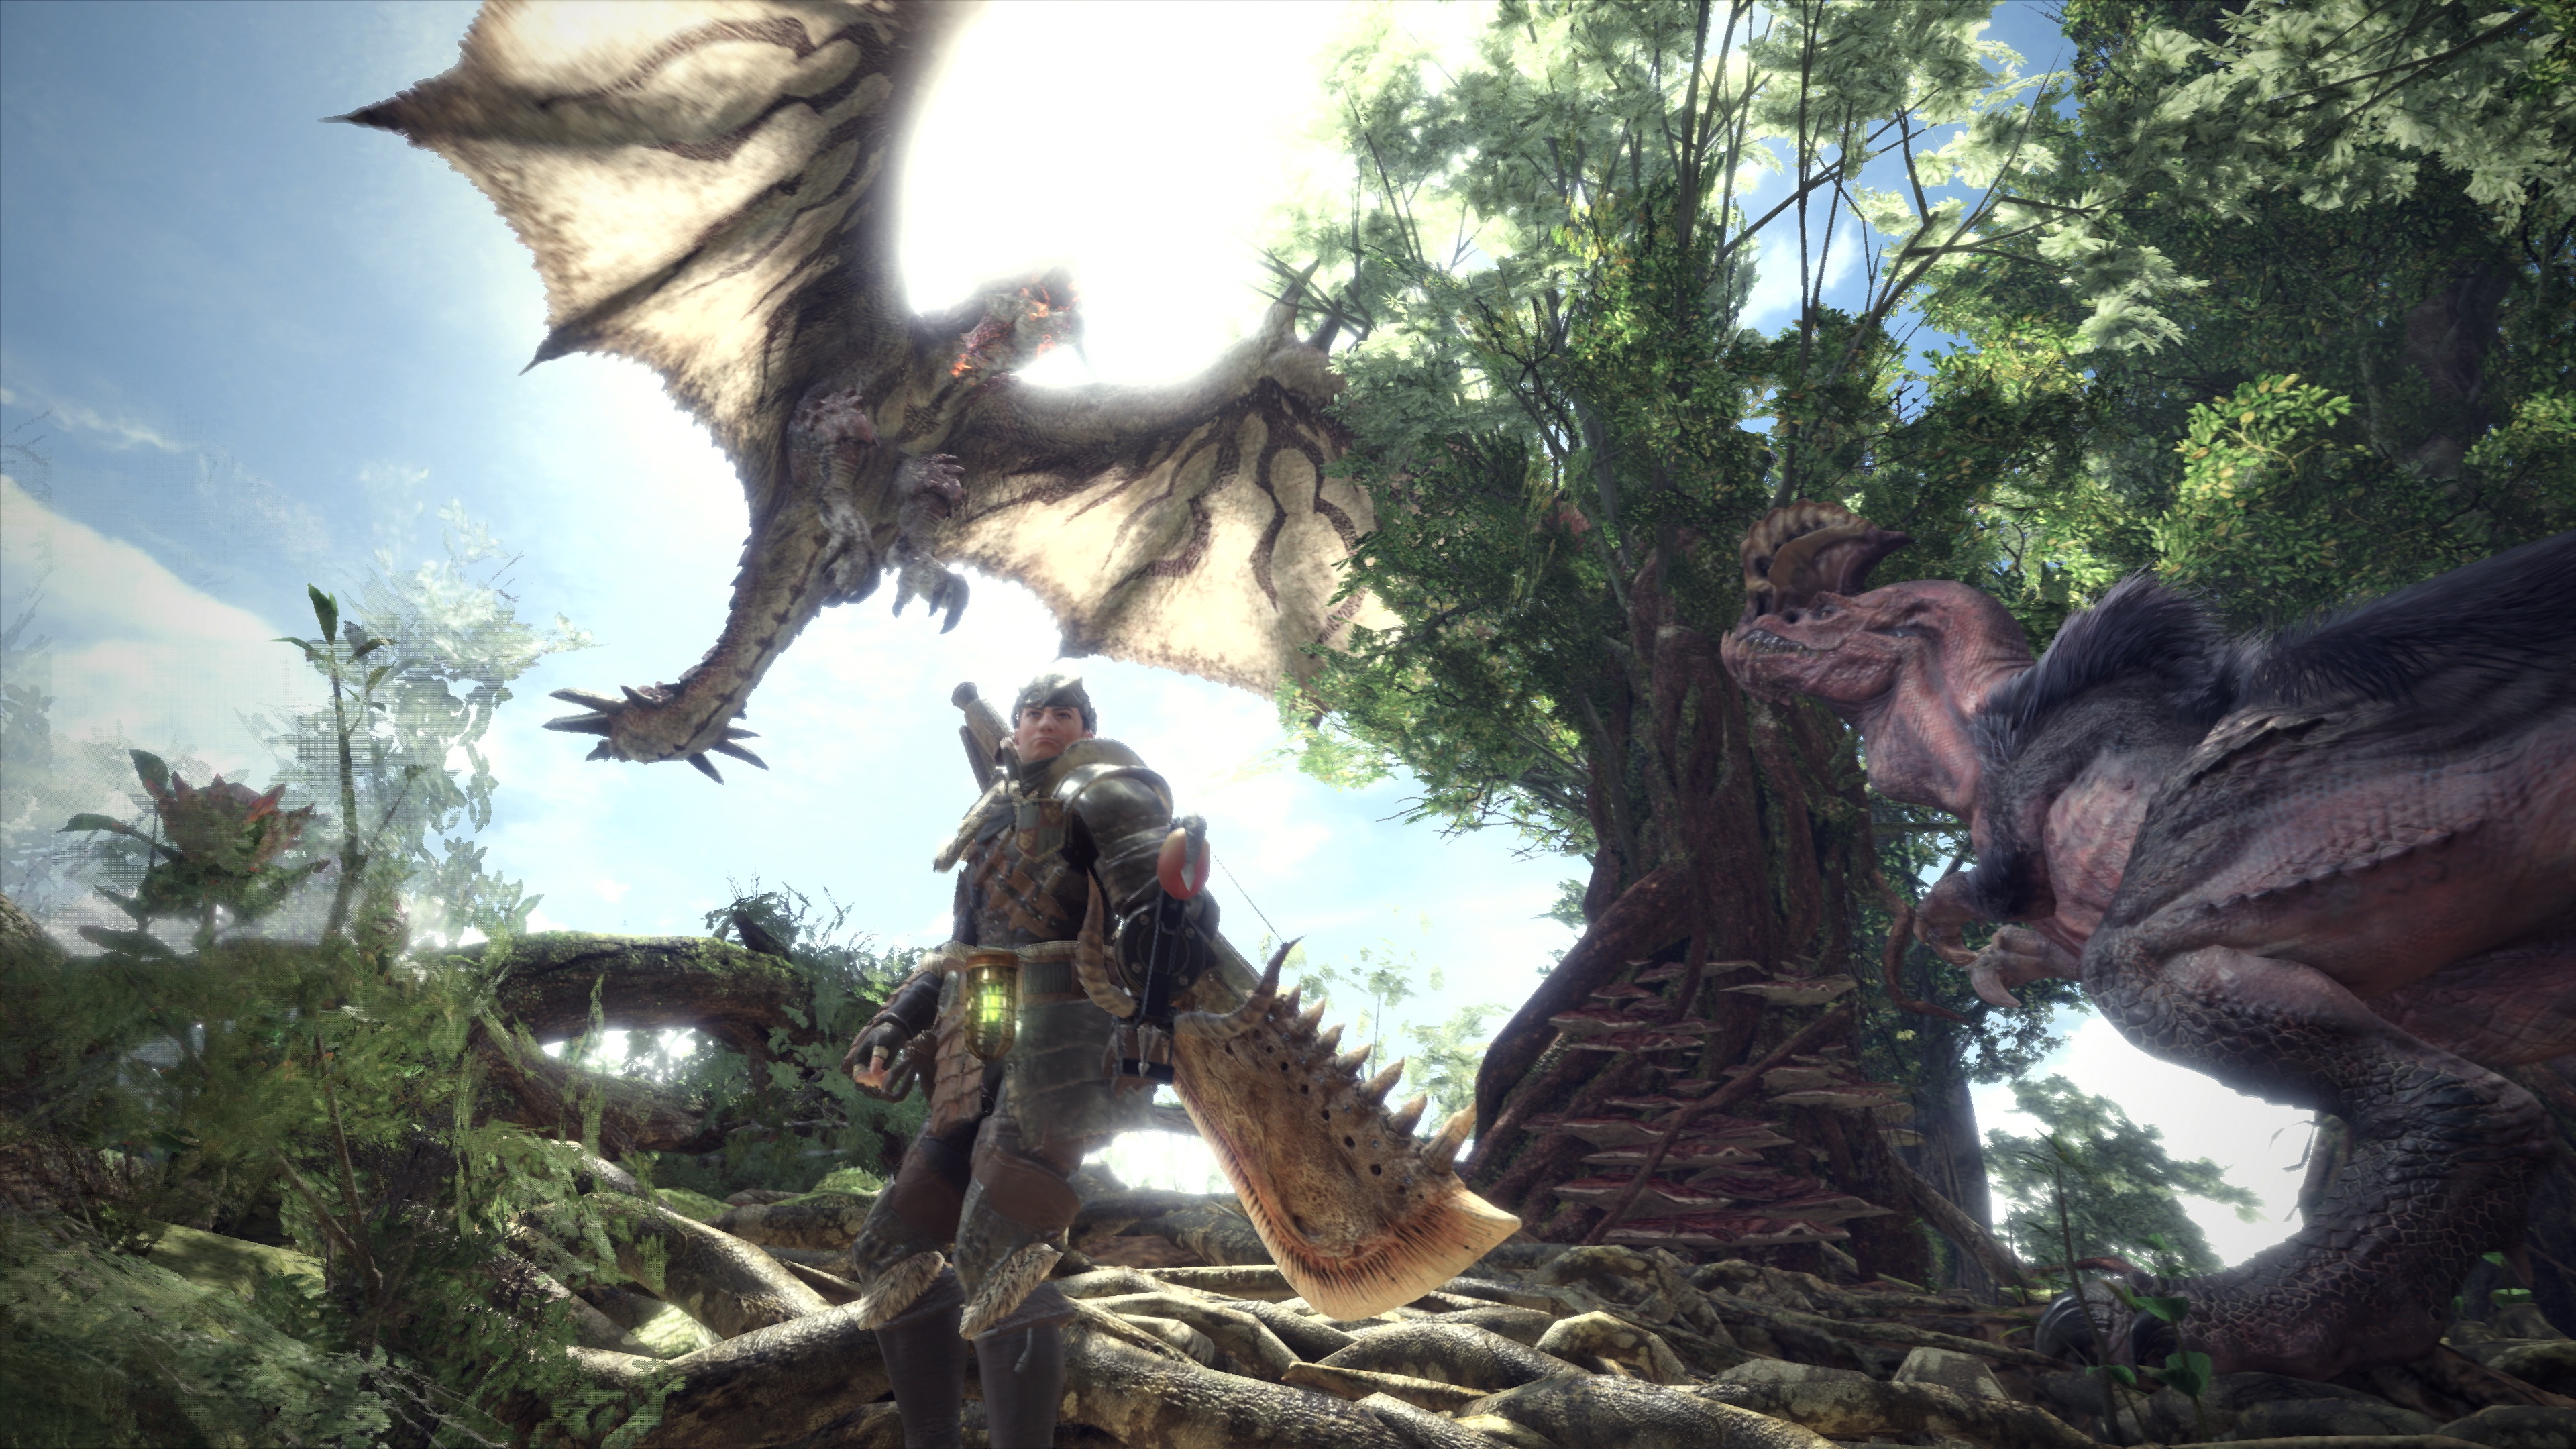 Monster Hunter: World’s story campaign will last 40-50 hours